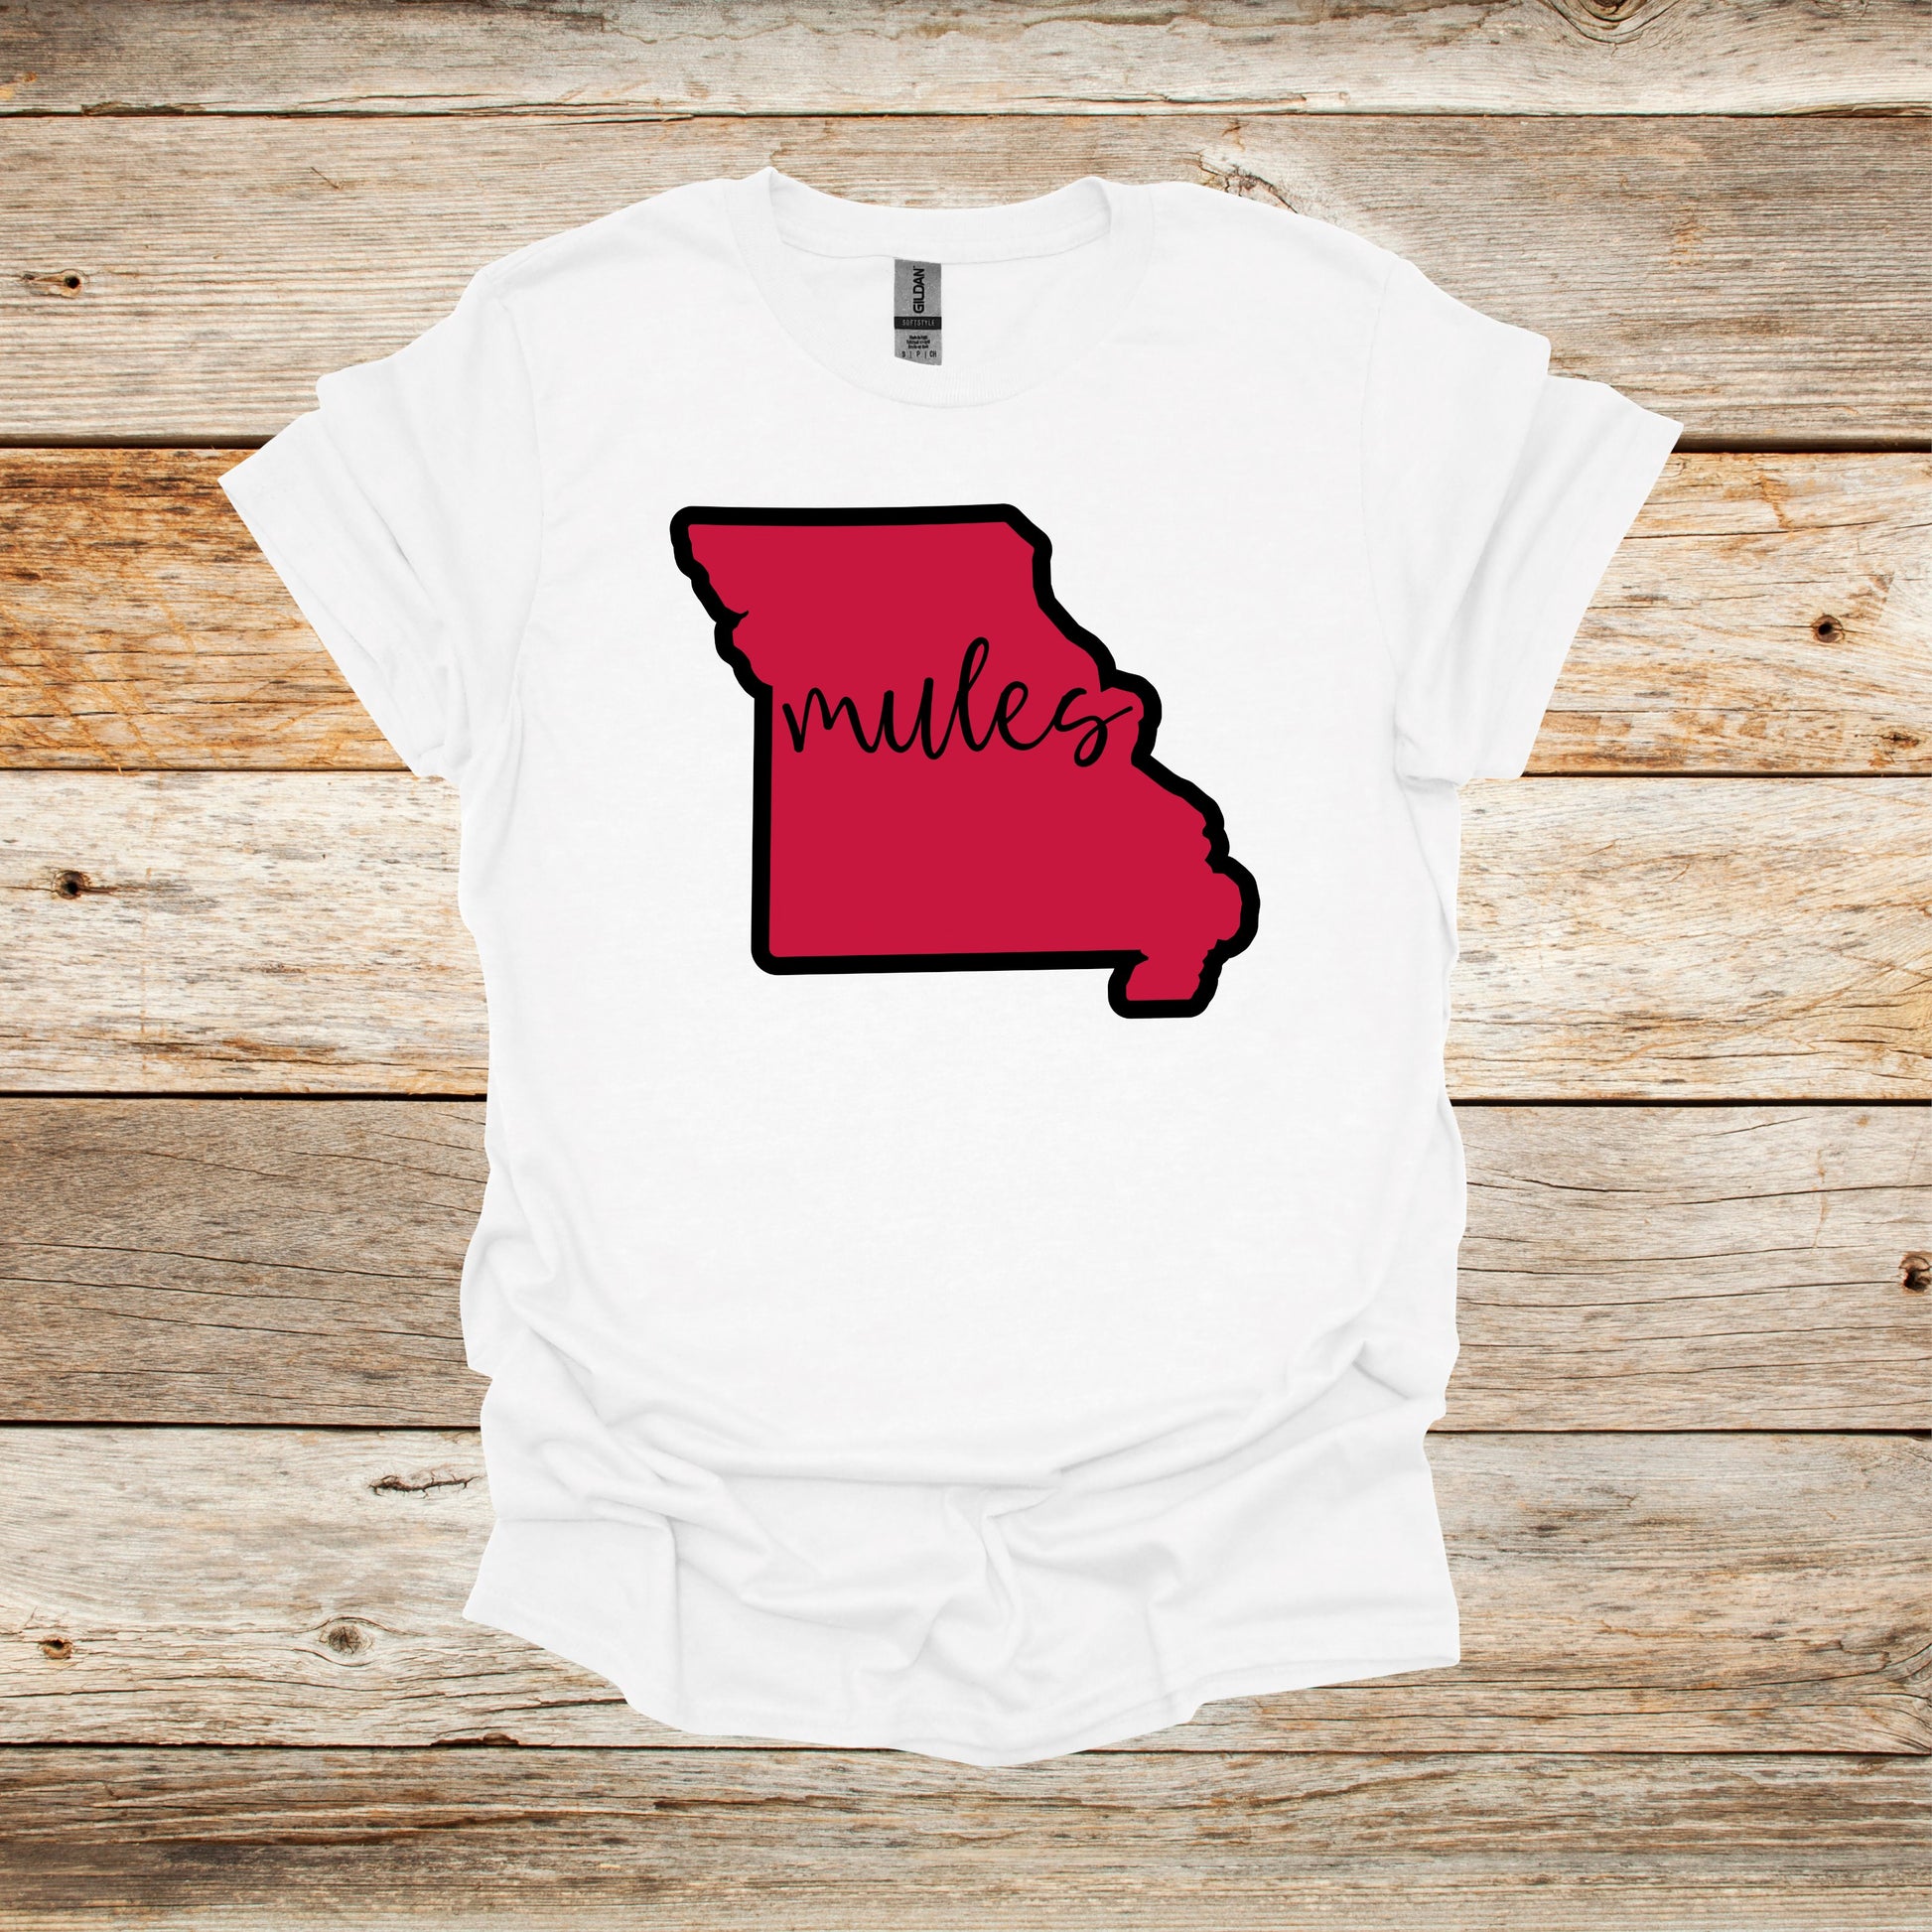 College T Shirt - University of Central Missouri Mules - State Outline - Adult and Children's Tee Shirts T-Shirts Graphic Avenue White Adult Small 